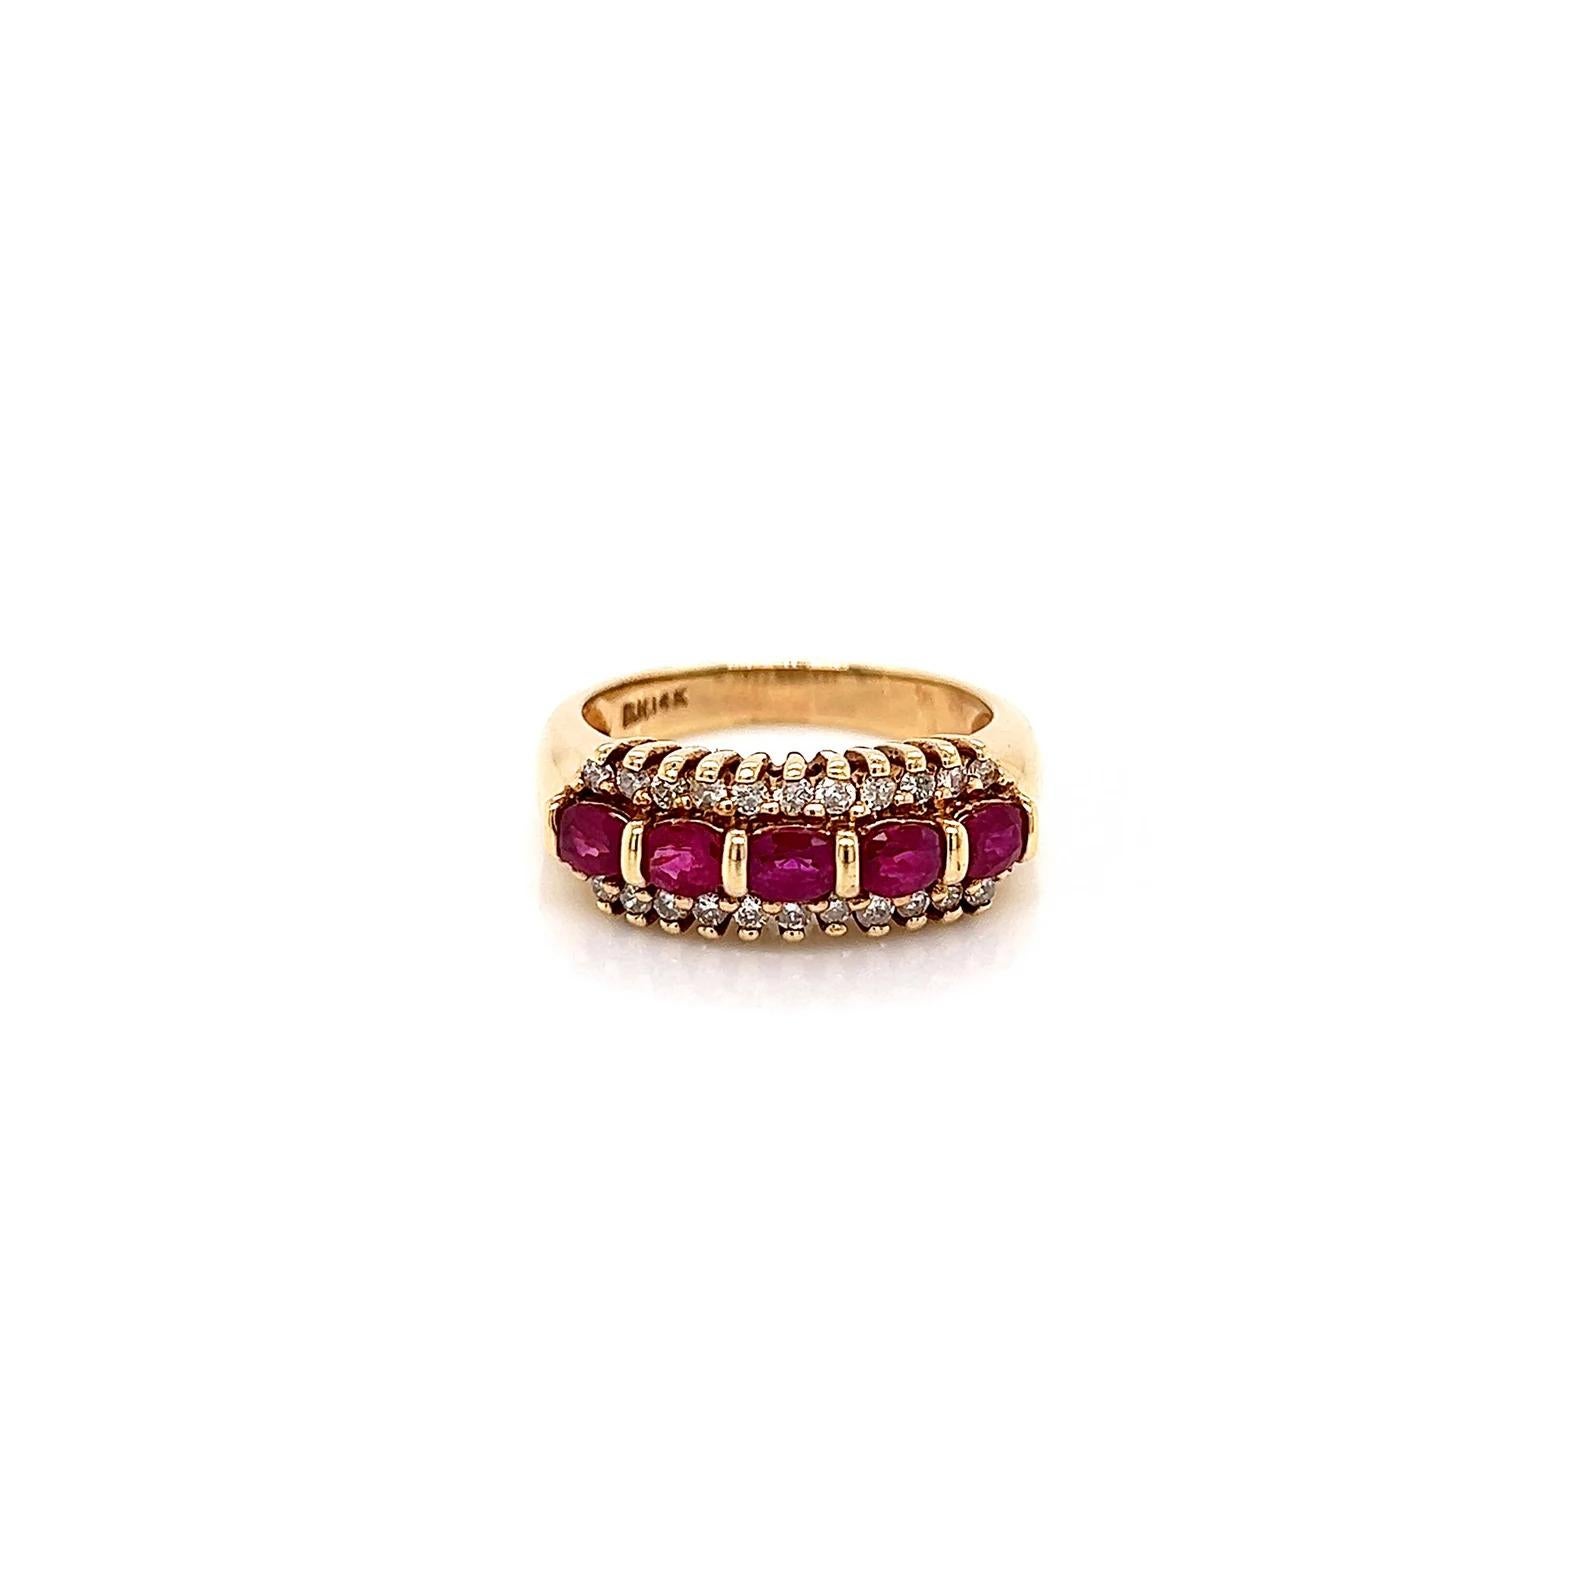 1.42 Total Carat Diamond and Ruby Ladies Ring

-Metal Type: 14K Yellow Gold
-0.32 Carat Round Natural Diamonds, G-H Color, SI Clarity 
-1.10 Carat Round Natural Ruby 
-Size 6.75

Resize is available. Just contact us before ordering, the price may